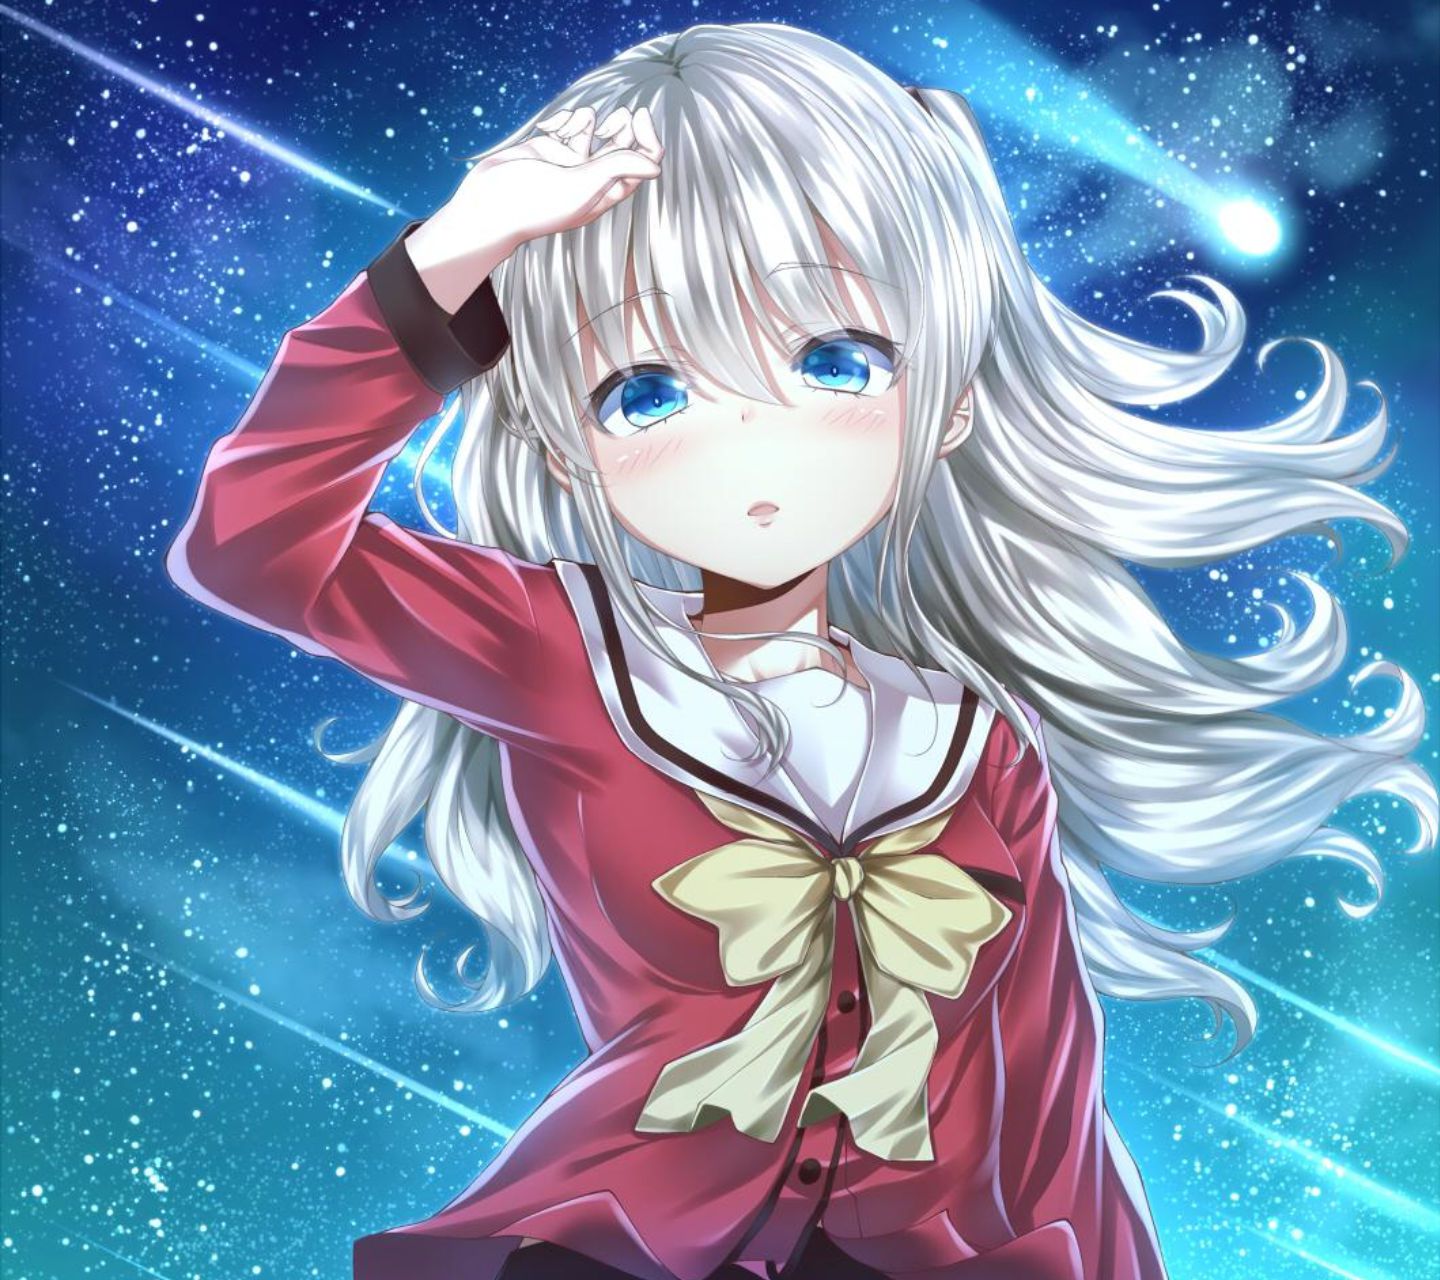 Charlotte シャーロット Android壁紙 1 友利奈緒 アニメ壁紙ネット Pc Android Iphone壁紙 画像